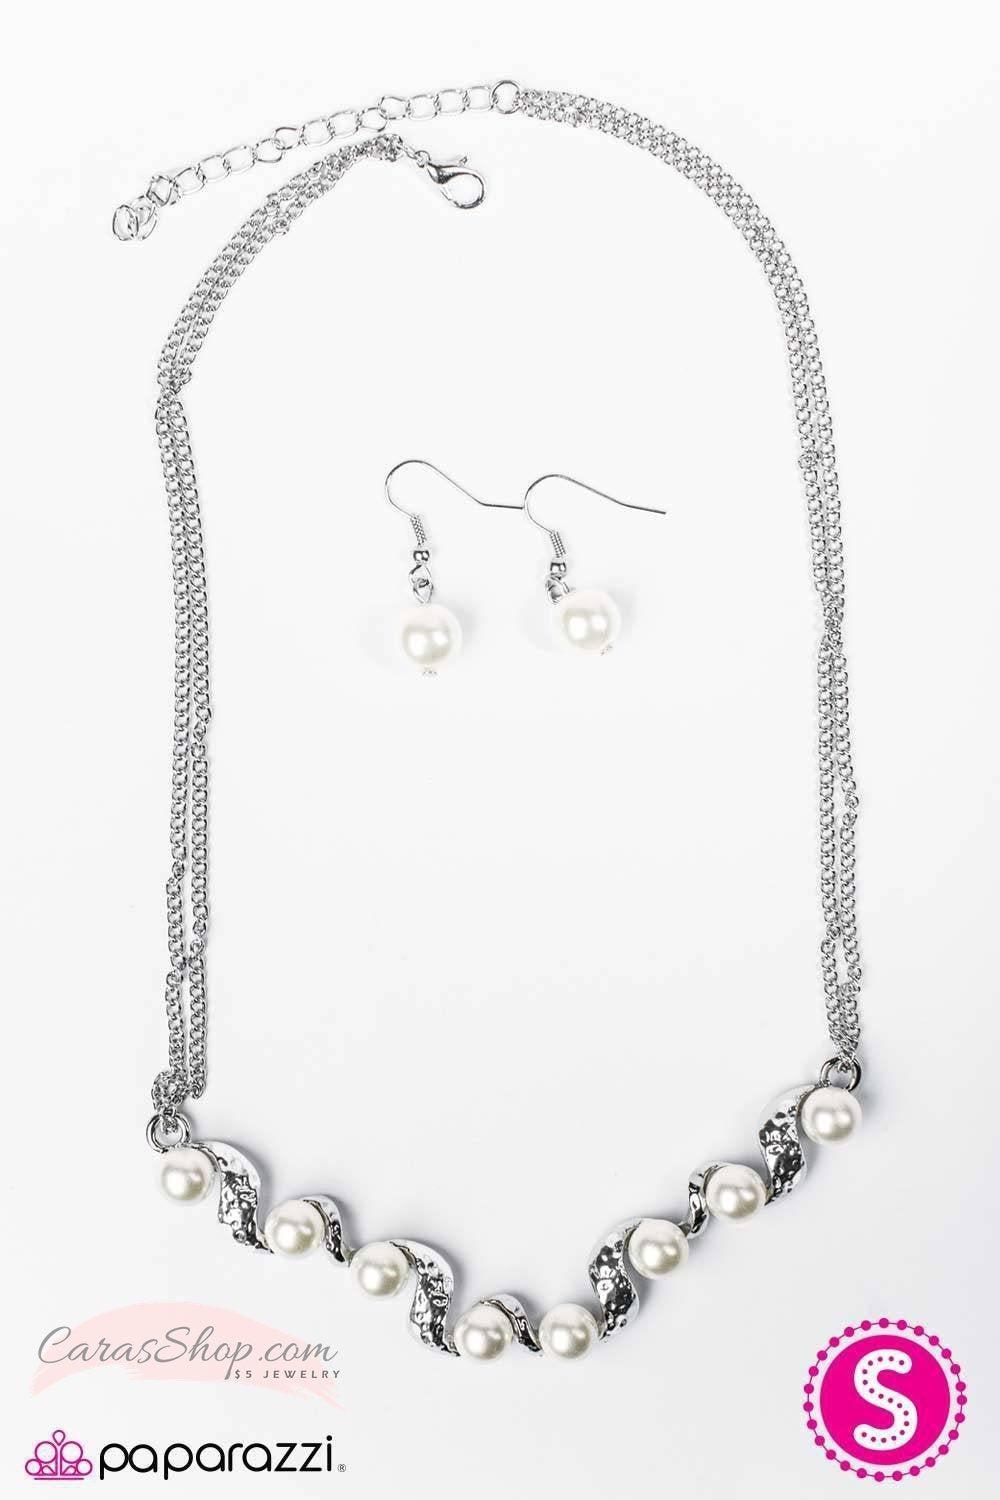 Crazy About You White Pearl Necklace and matching Earrings - Paparazzi Accessories-CarasShop.com - $5 Jewelry by Cara Jewels